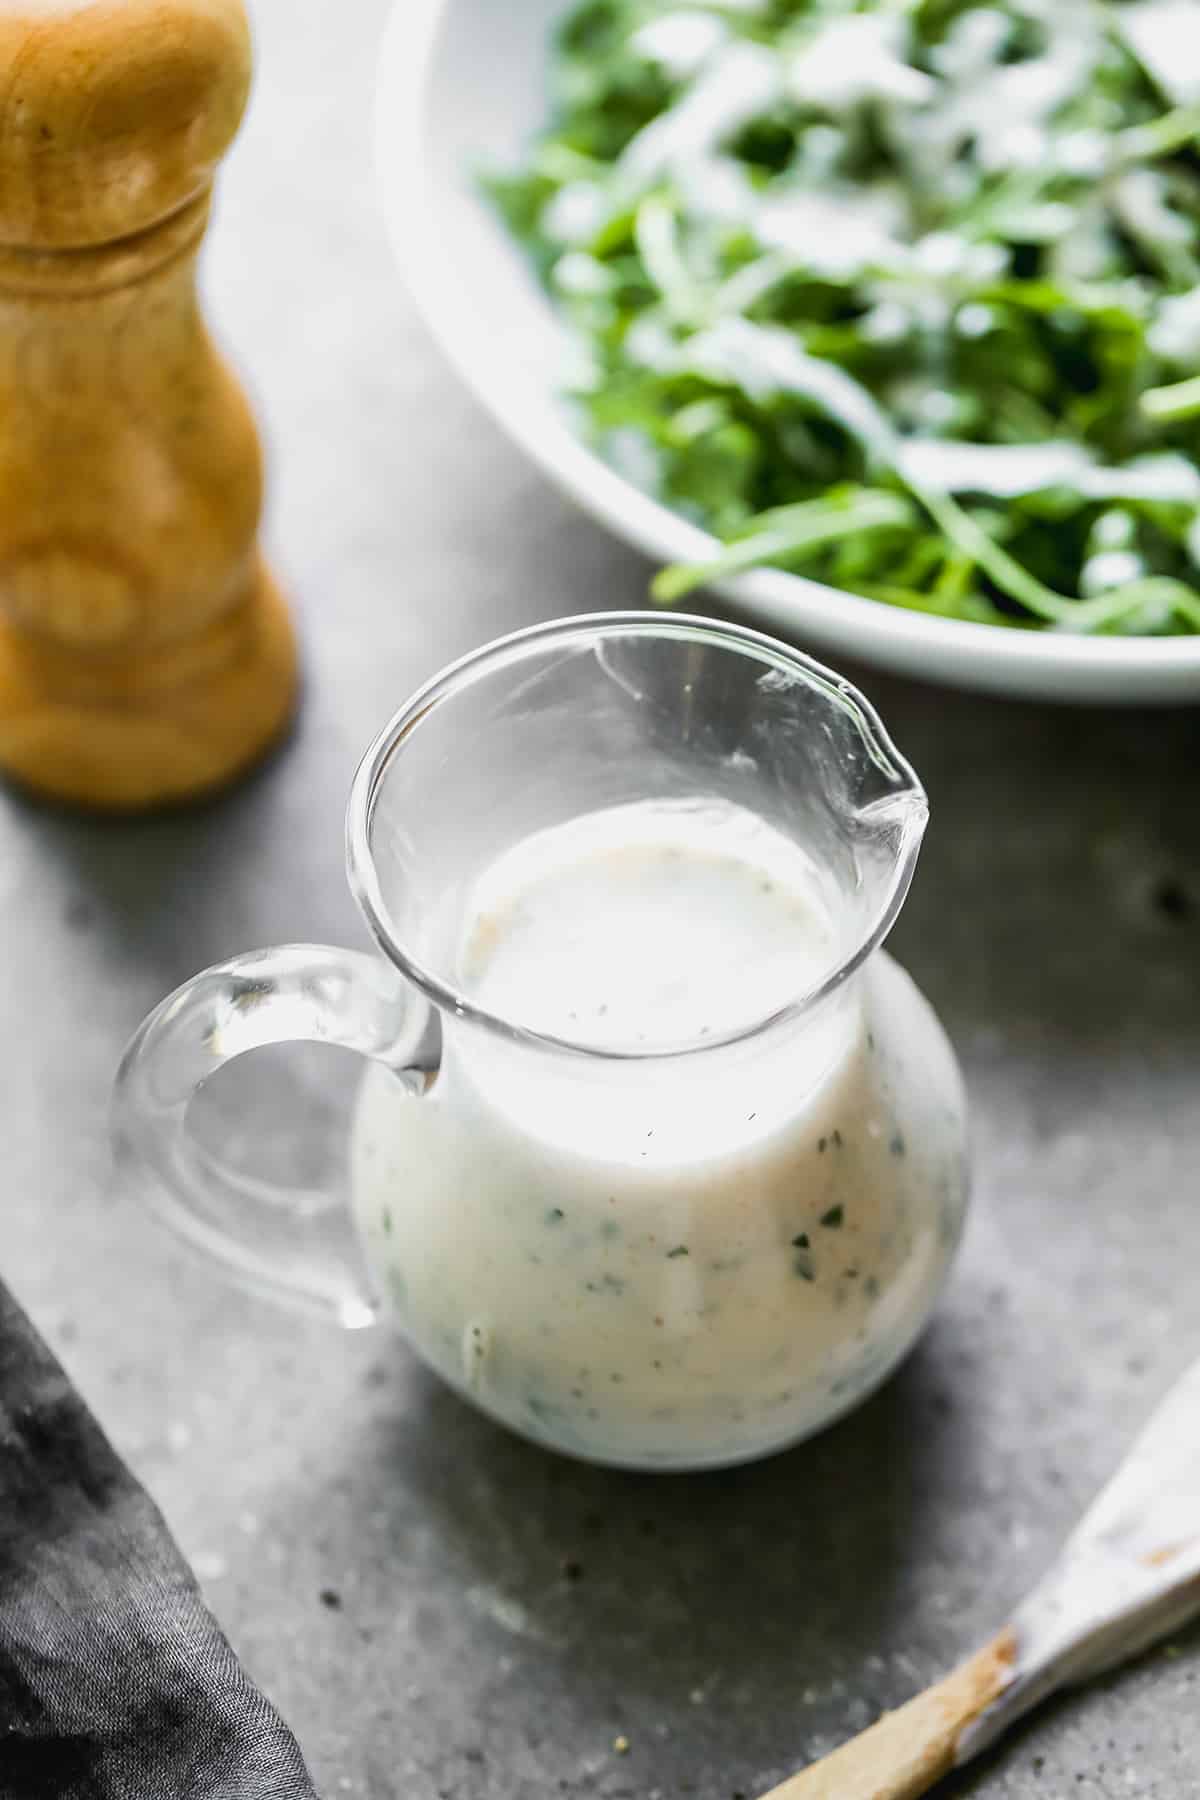 A serving jar filled with homemade Ranch Dressing, perfect for dipping vegetables or pouring on a salad.